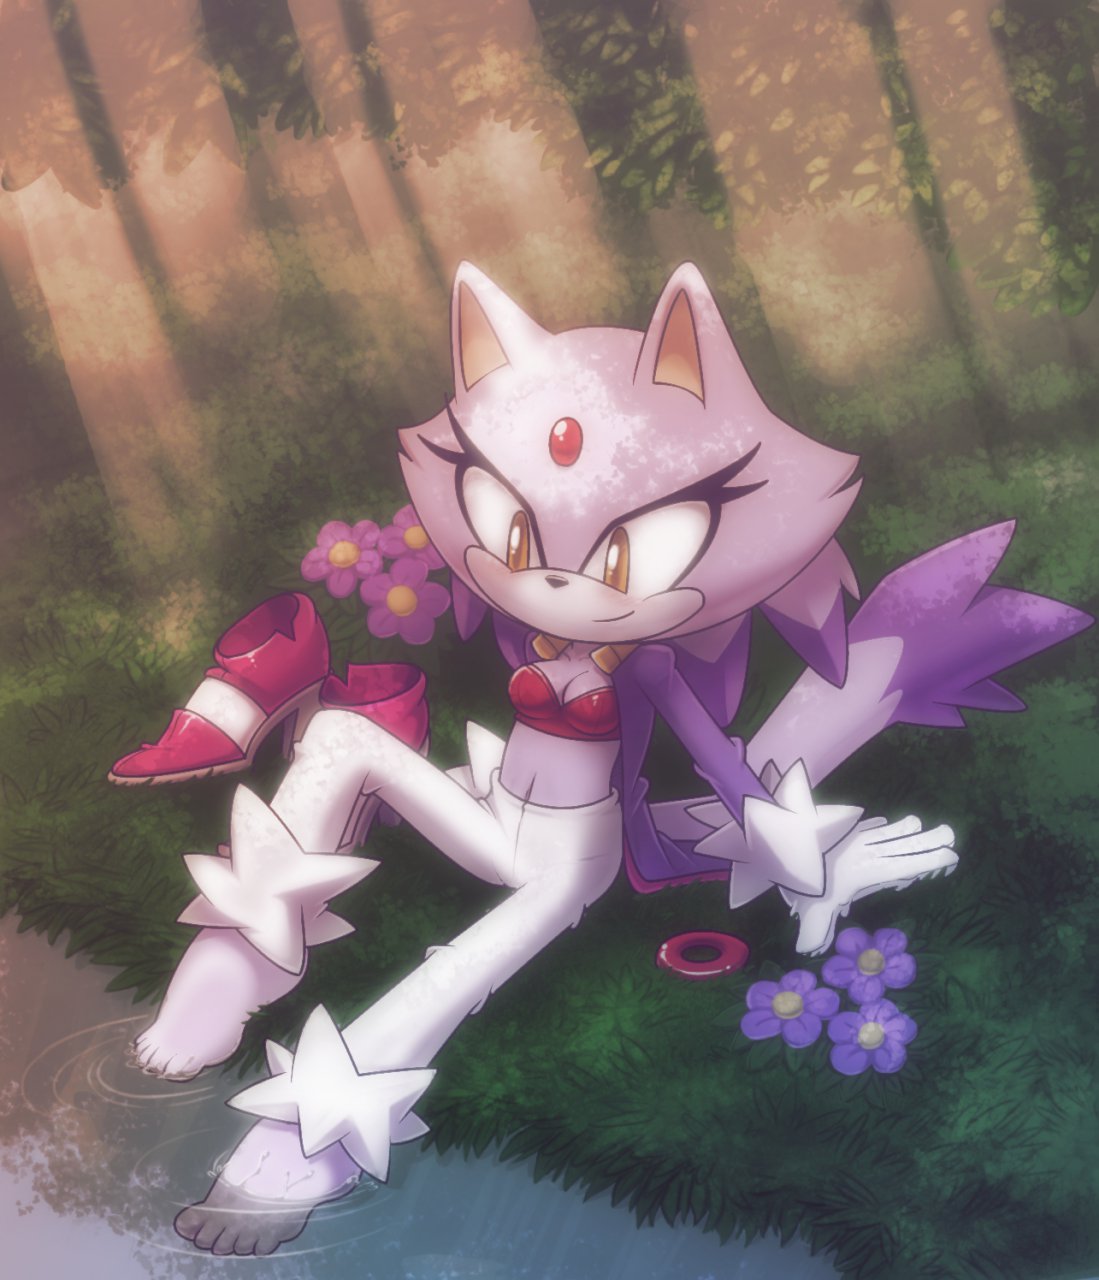 Blaze the cat moment of peace +remake+. 